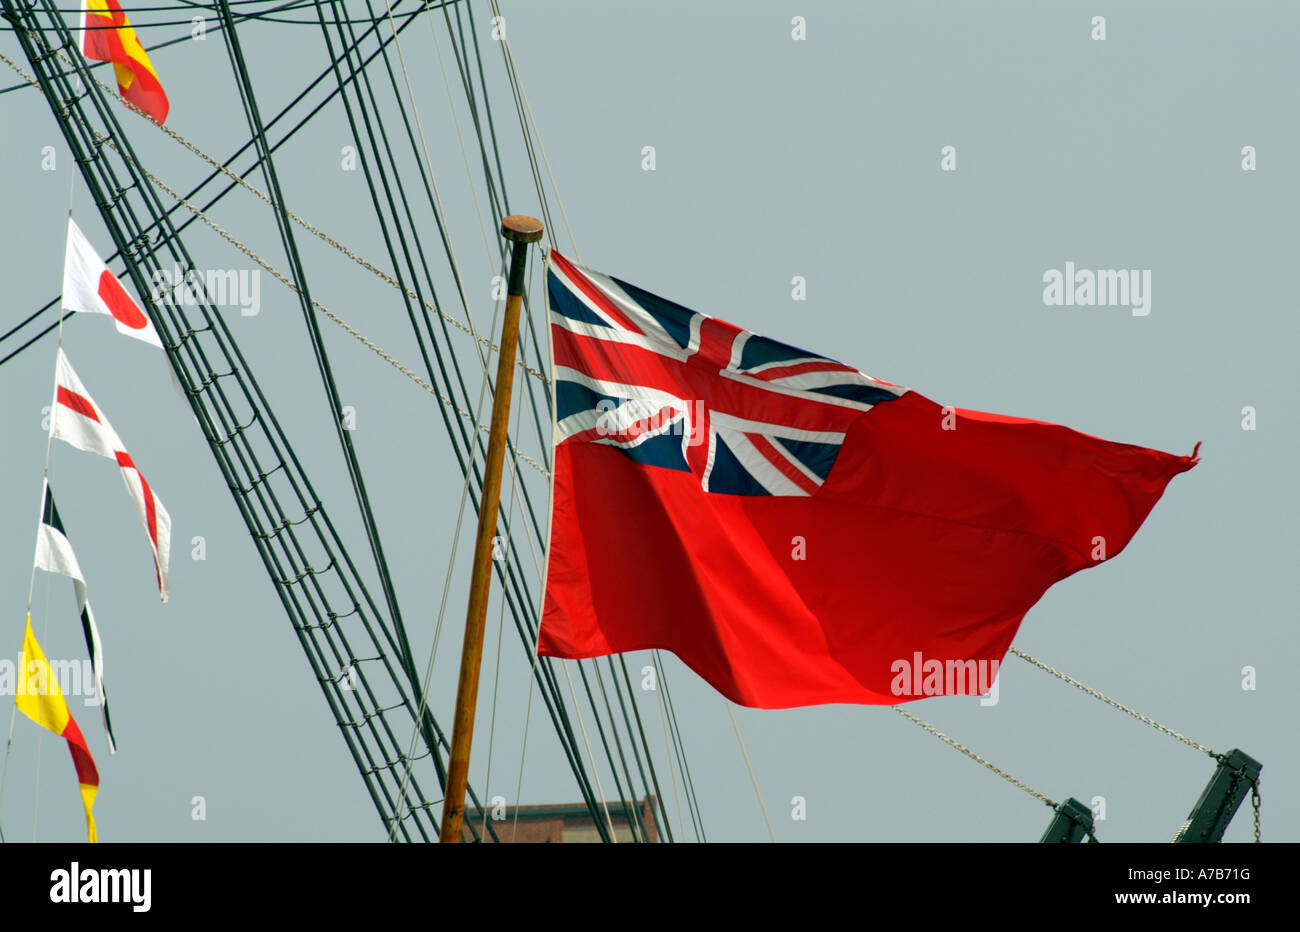 Splendor Inde Stoop Red Ensign flag also known as the Red Duster Flown by British ships Stock  Photo - Alamy